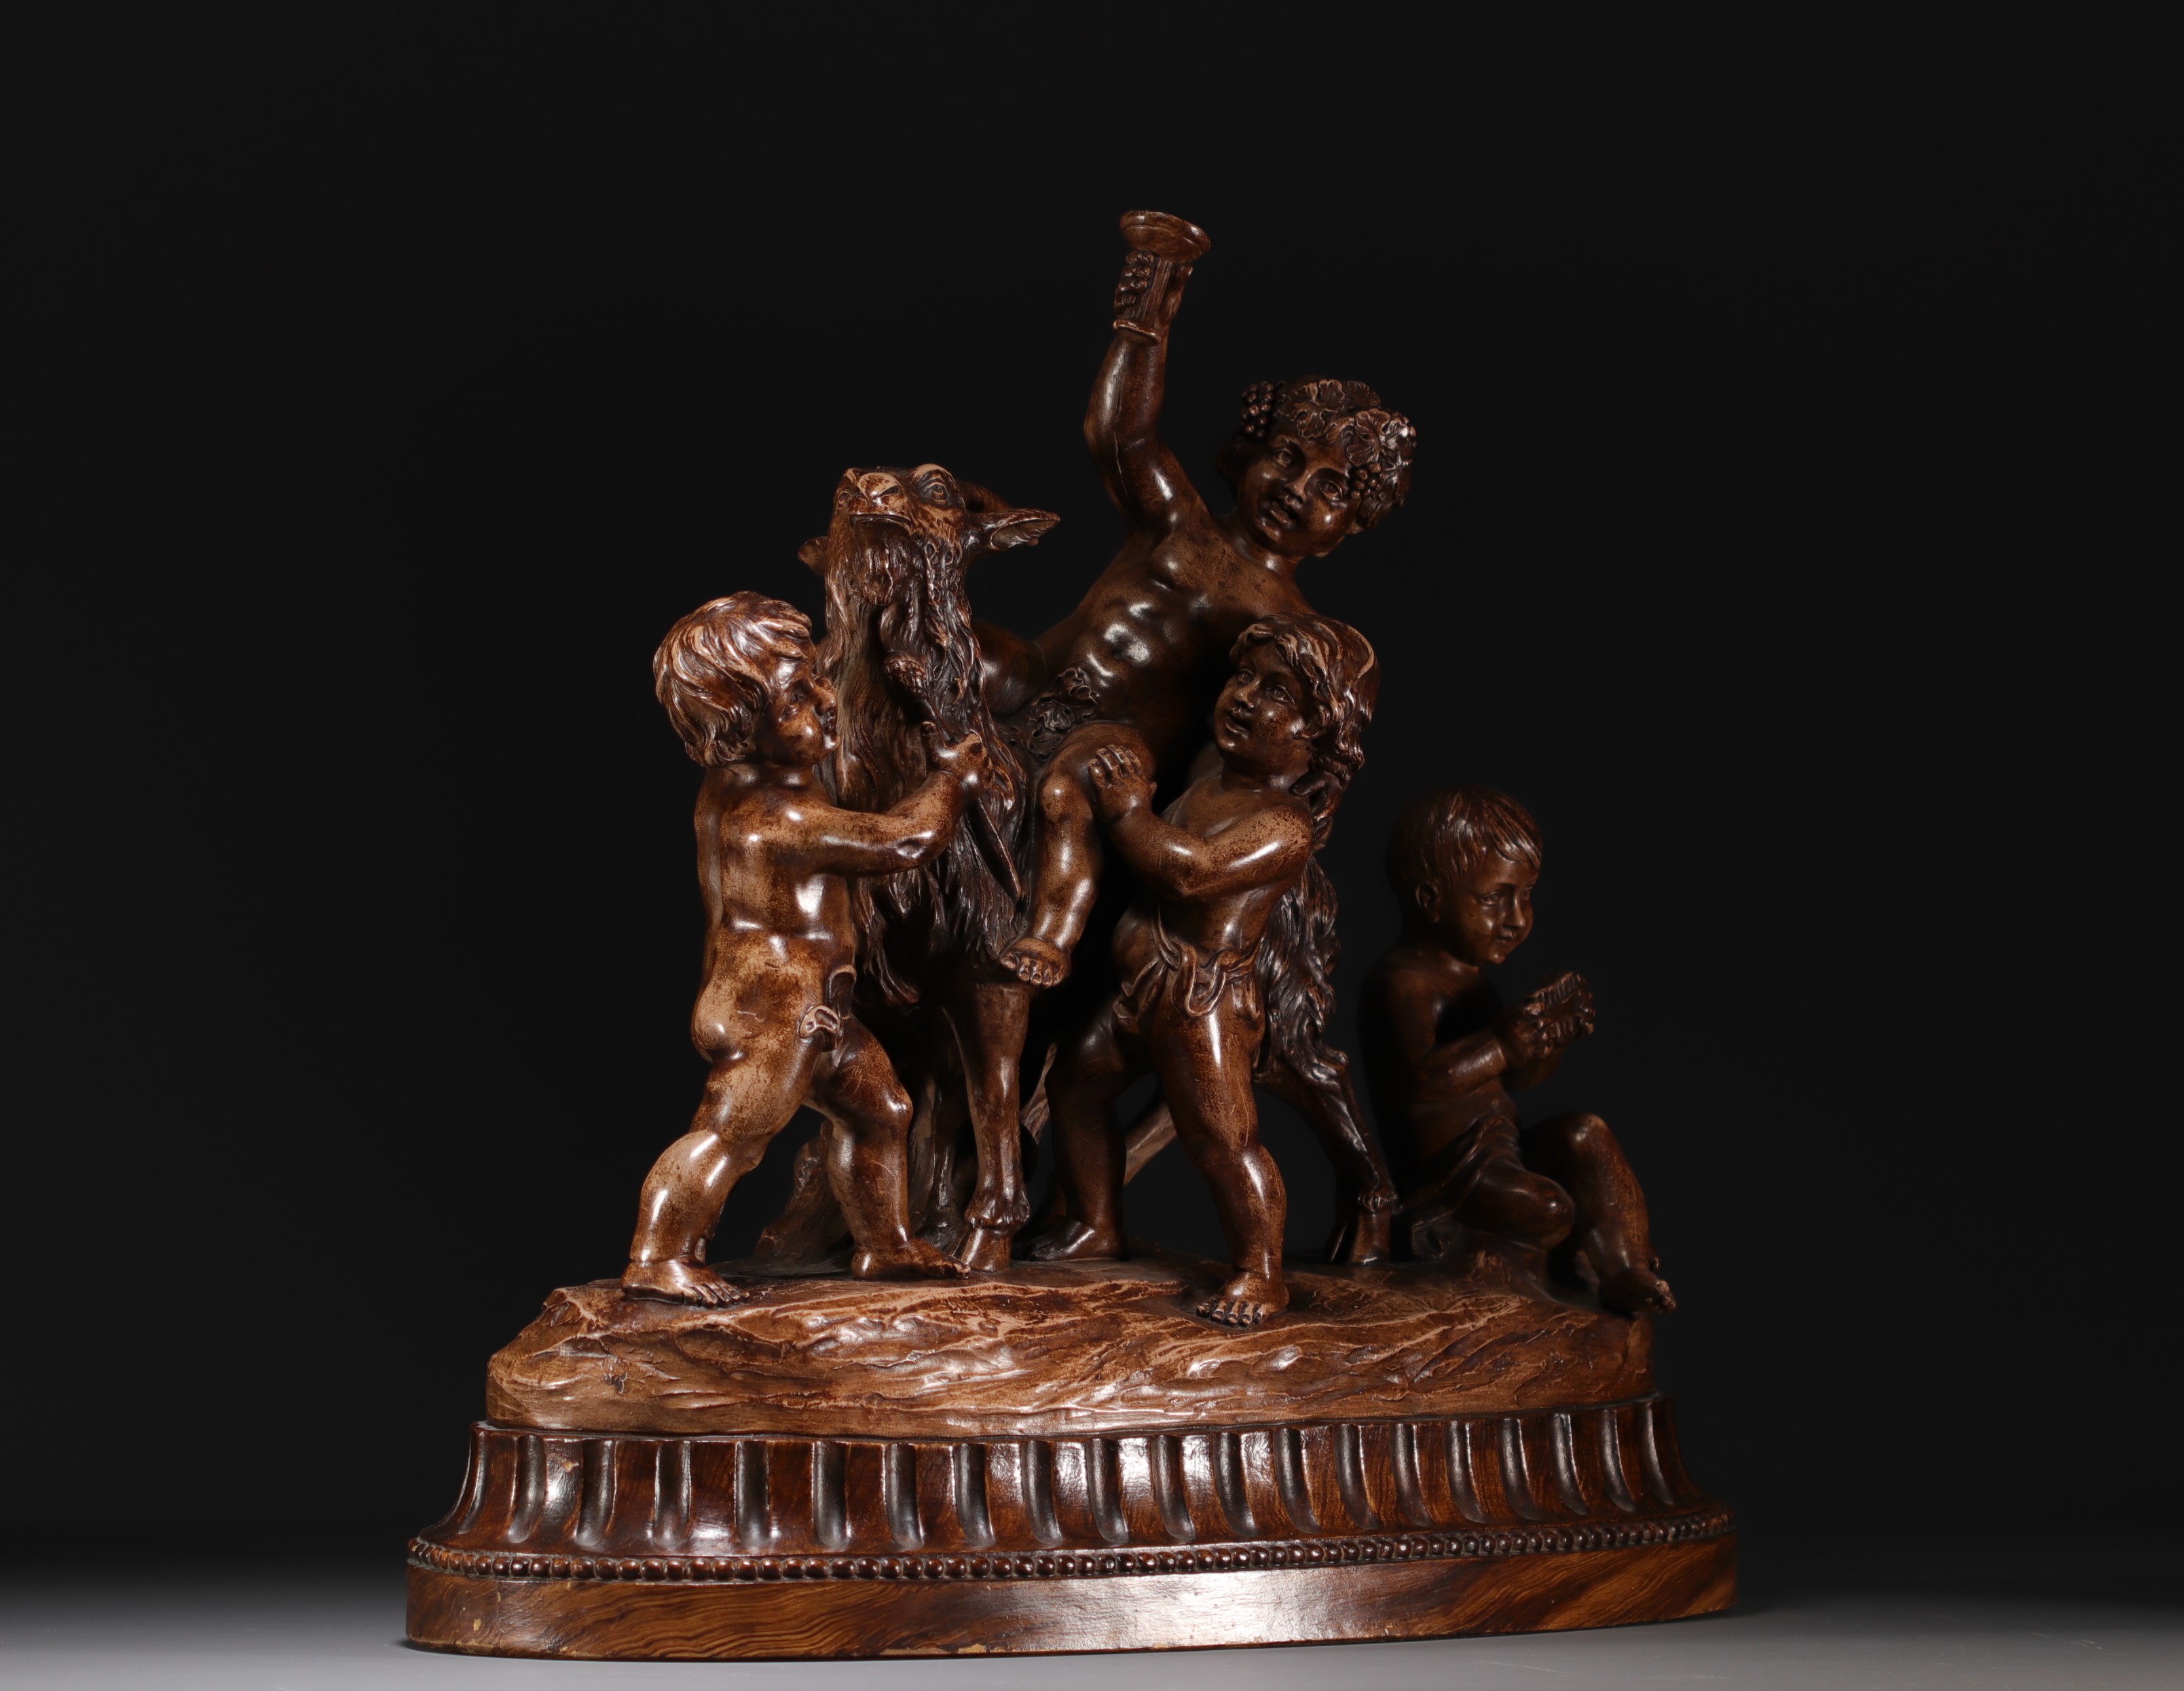 Pierre BALLESTRA - "Goat and Putti" Large group in patinated terracotta, 19th century. - Image 3 of 3